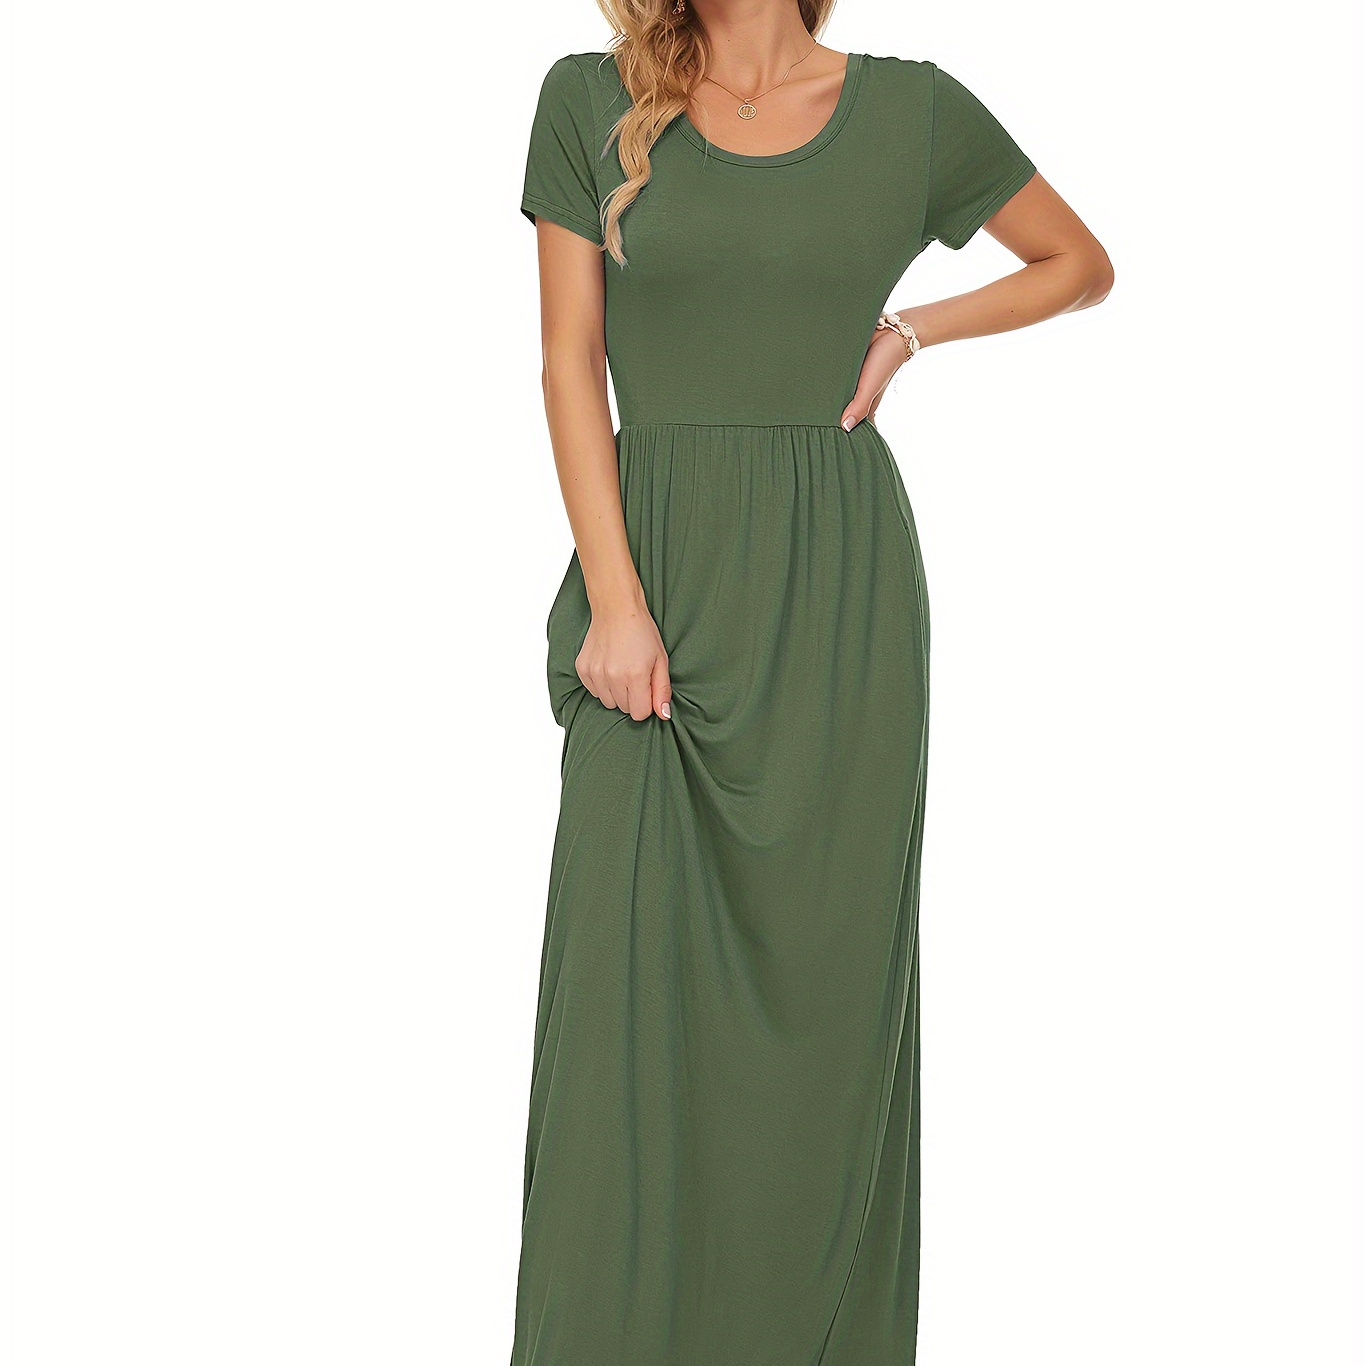 

Solid Color Crew Neck Maxi Dress, Casual Short Sleeve Loose Dress With Pocket, Women's Clothing